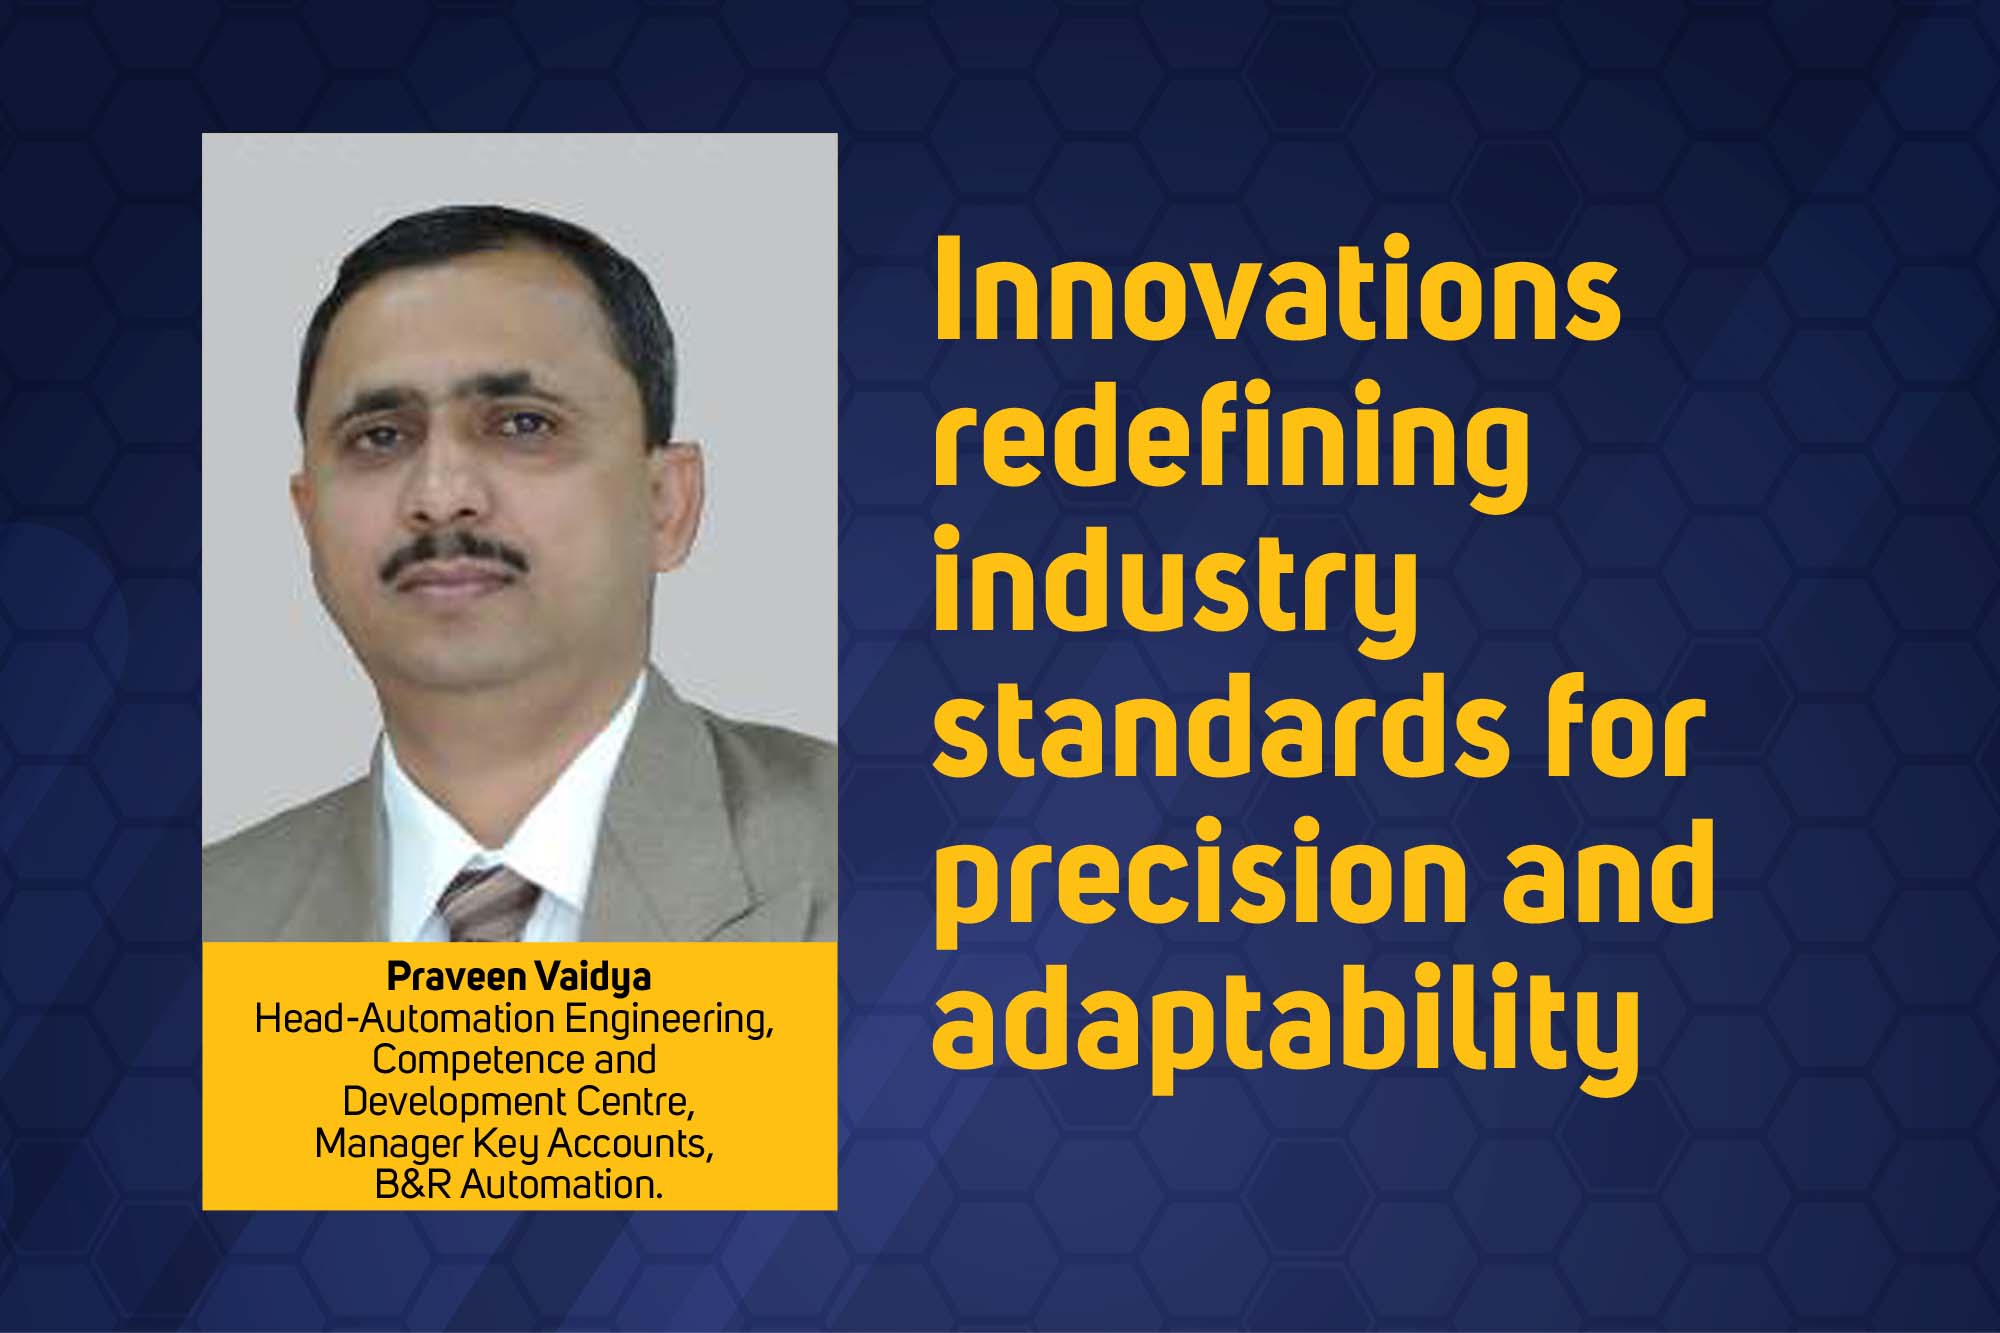 Innovations redefining industry standards for precision and adaptability